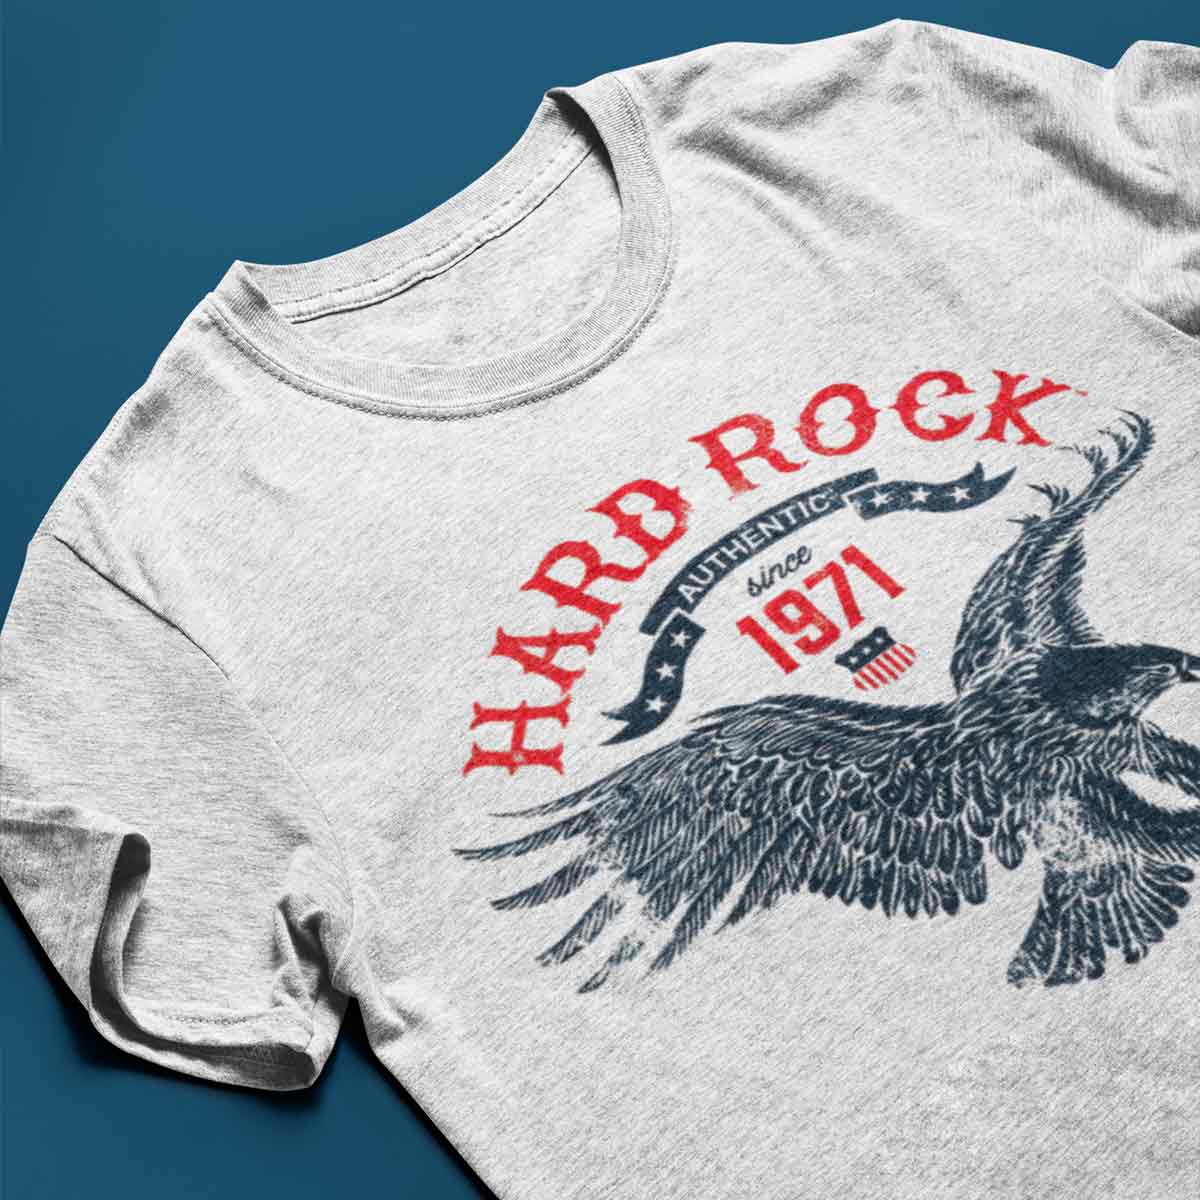 Americana Adult Fit Grey Tee with Flying Eagle Logo Motif image number 5